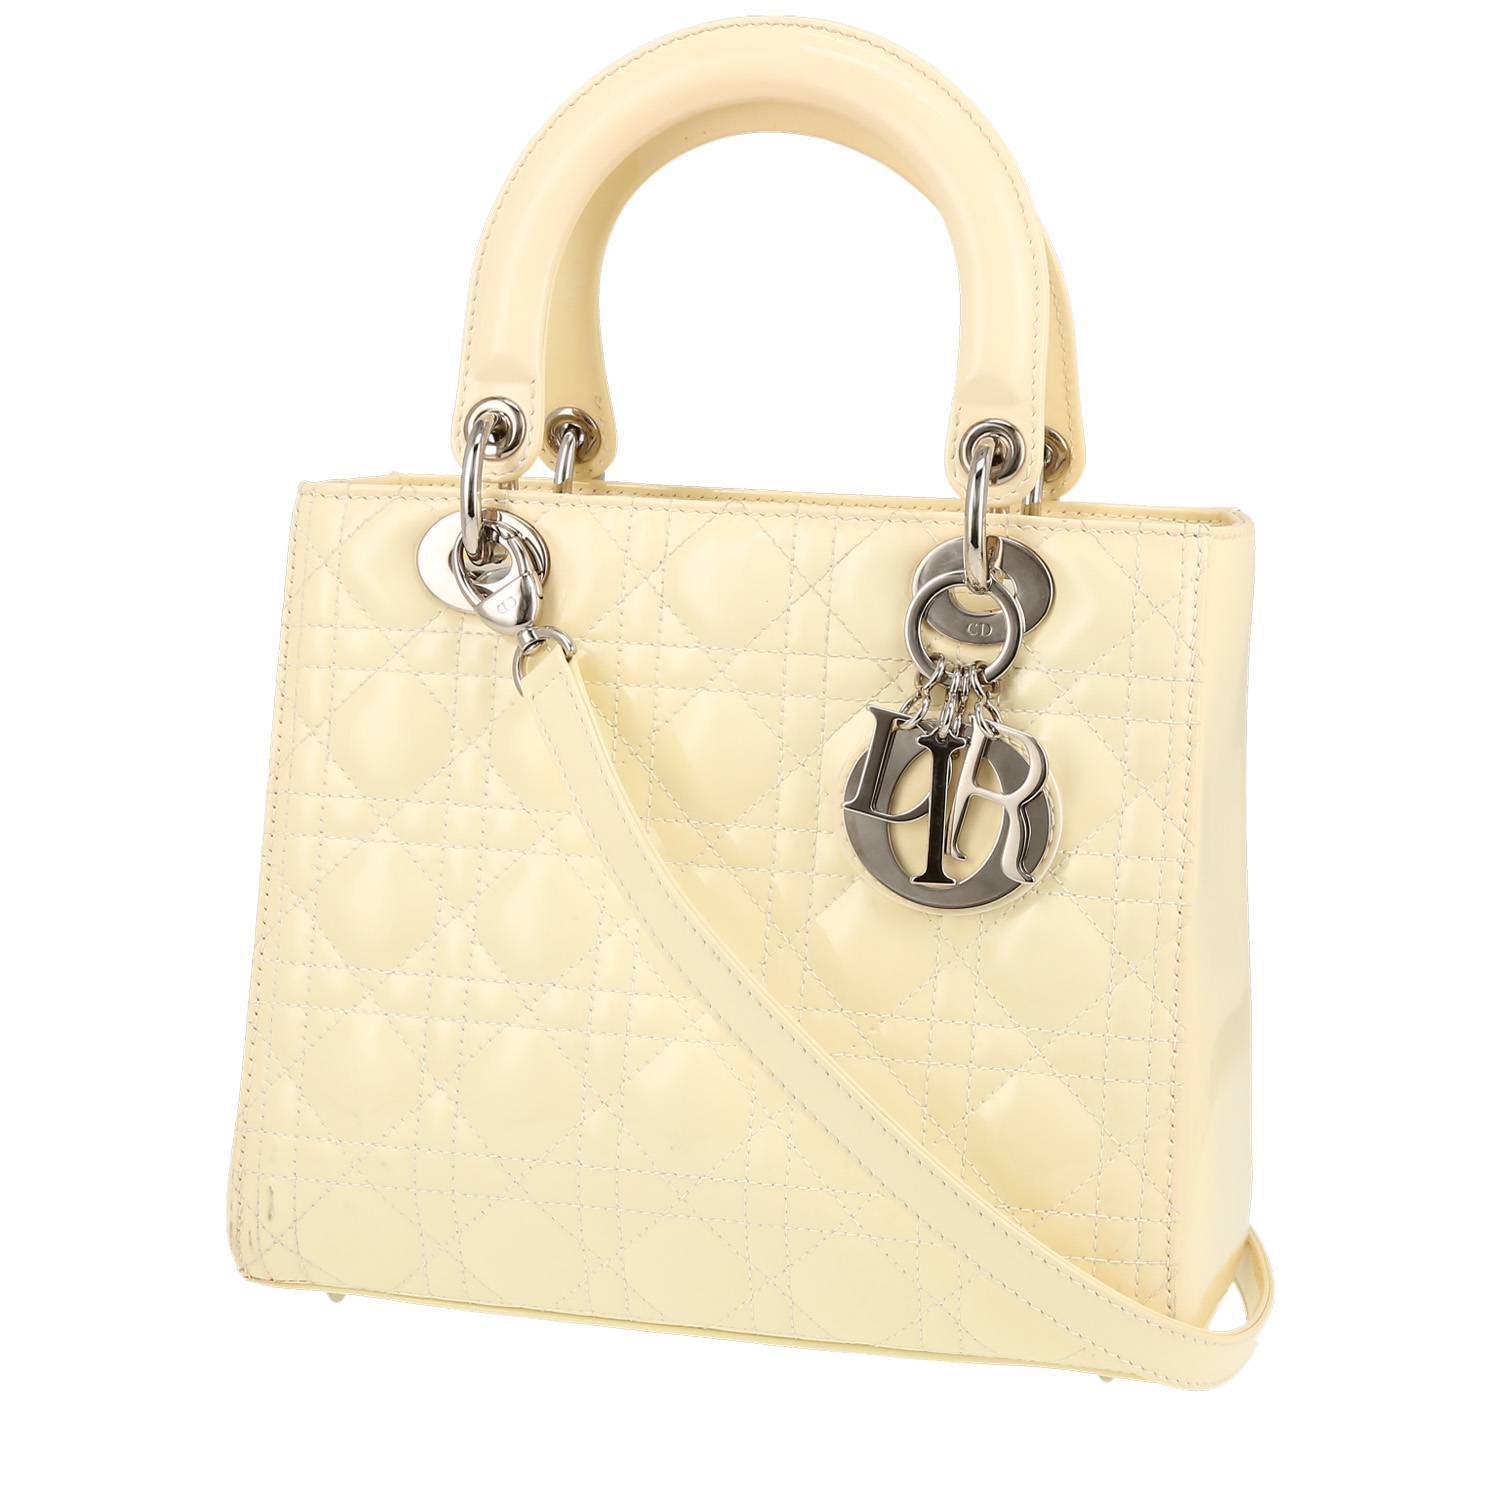 Lady Dior Handbag In Yellow Patent Leather